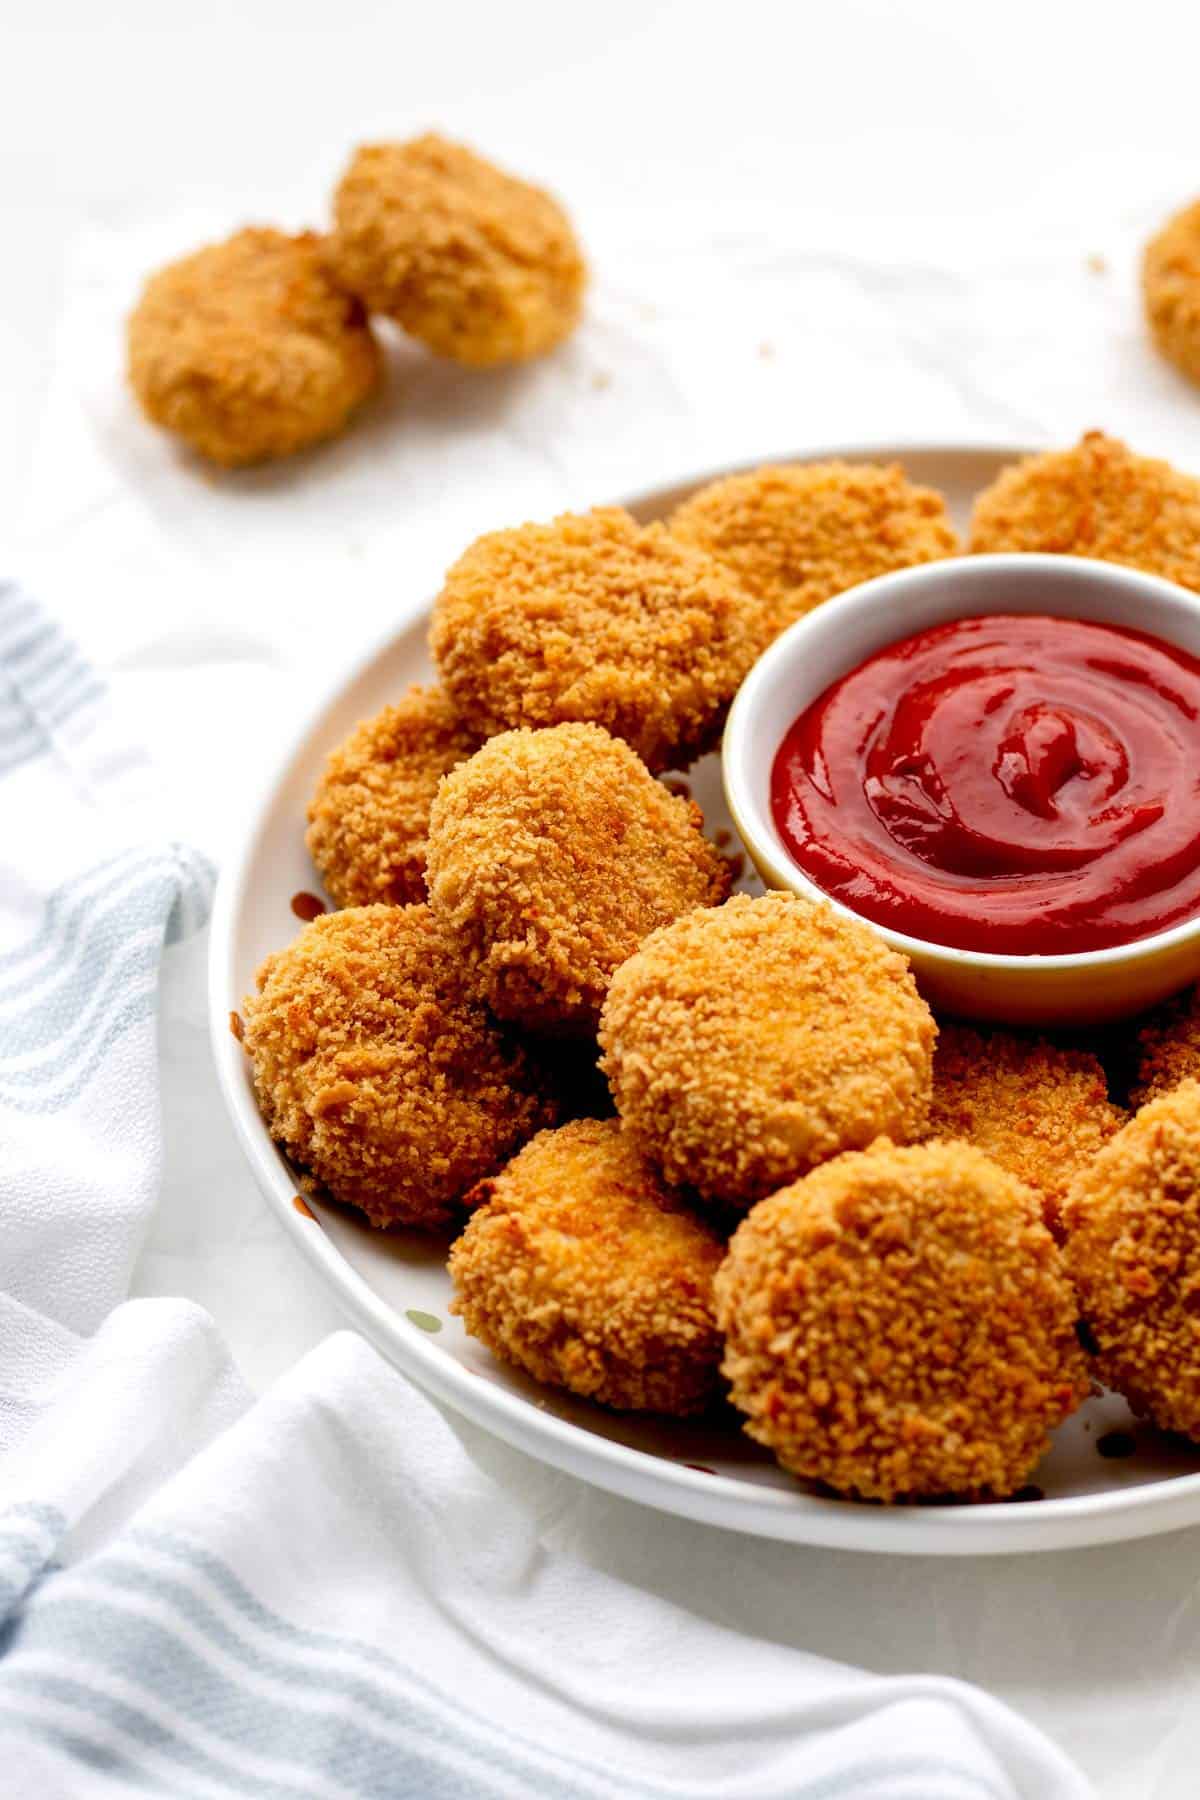 Cauliflower chicken nuggets arranged on a circular platter with a bowl of ketchup in the middle.